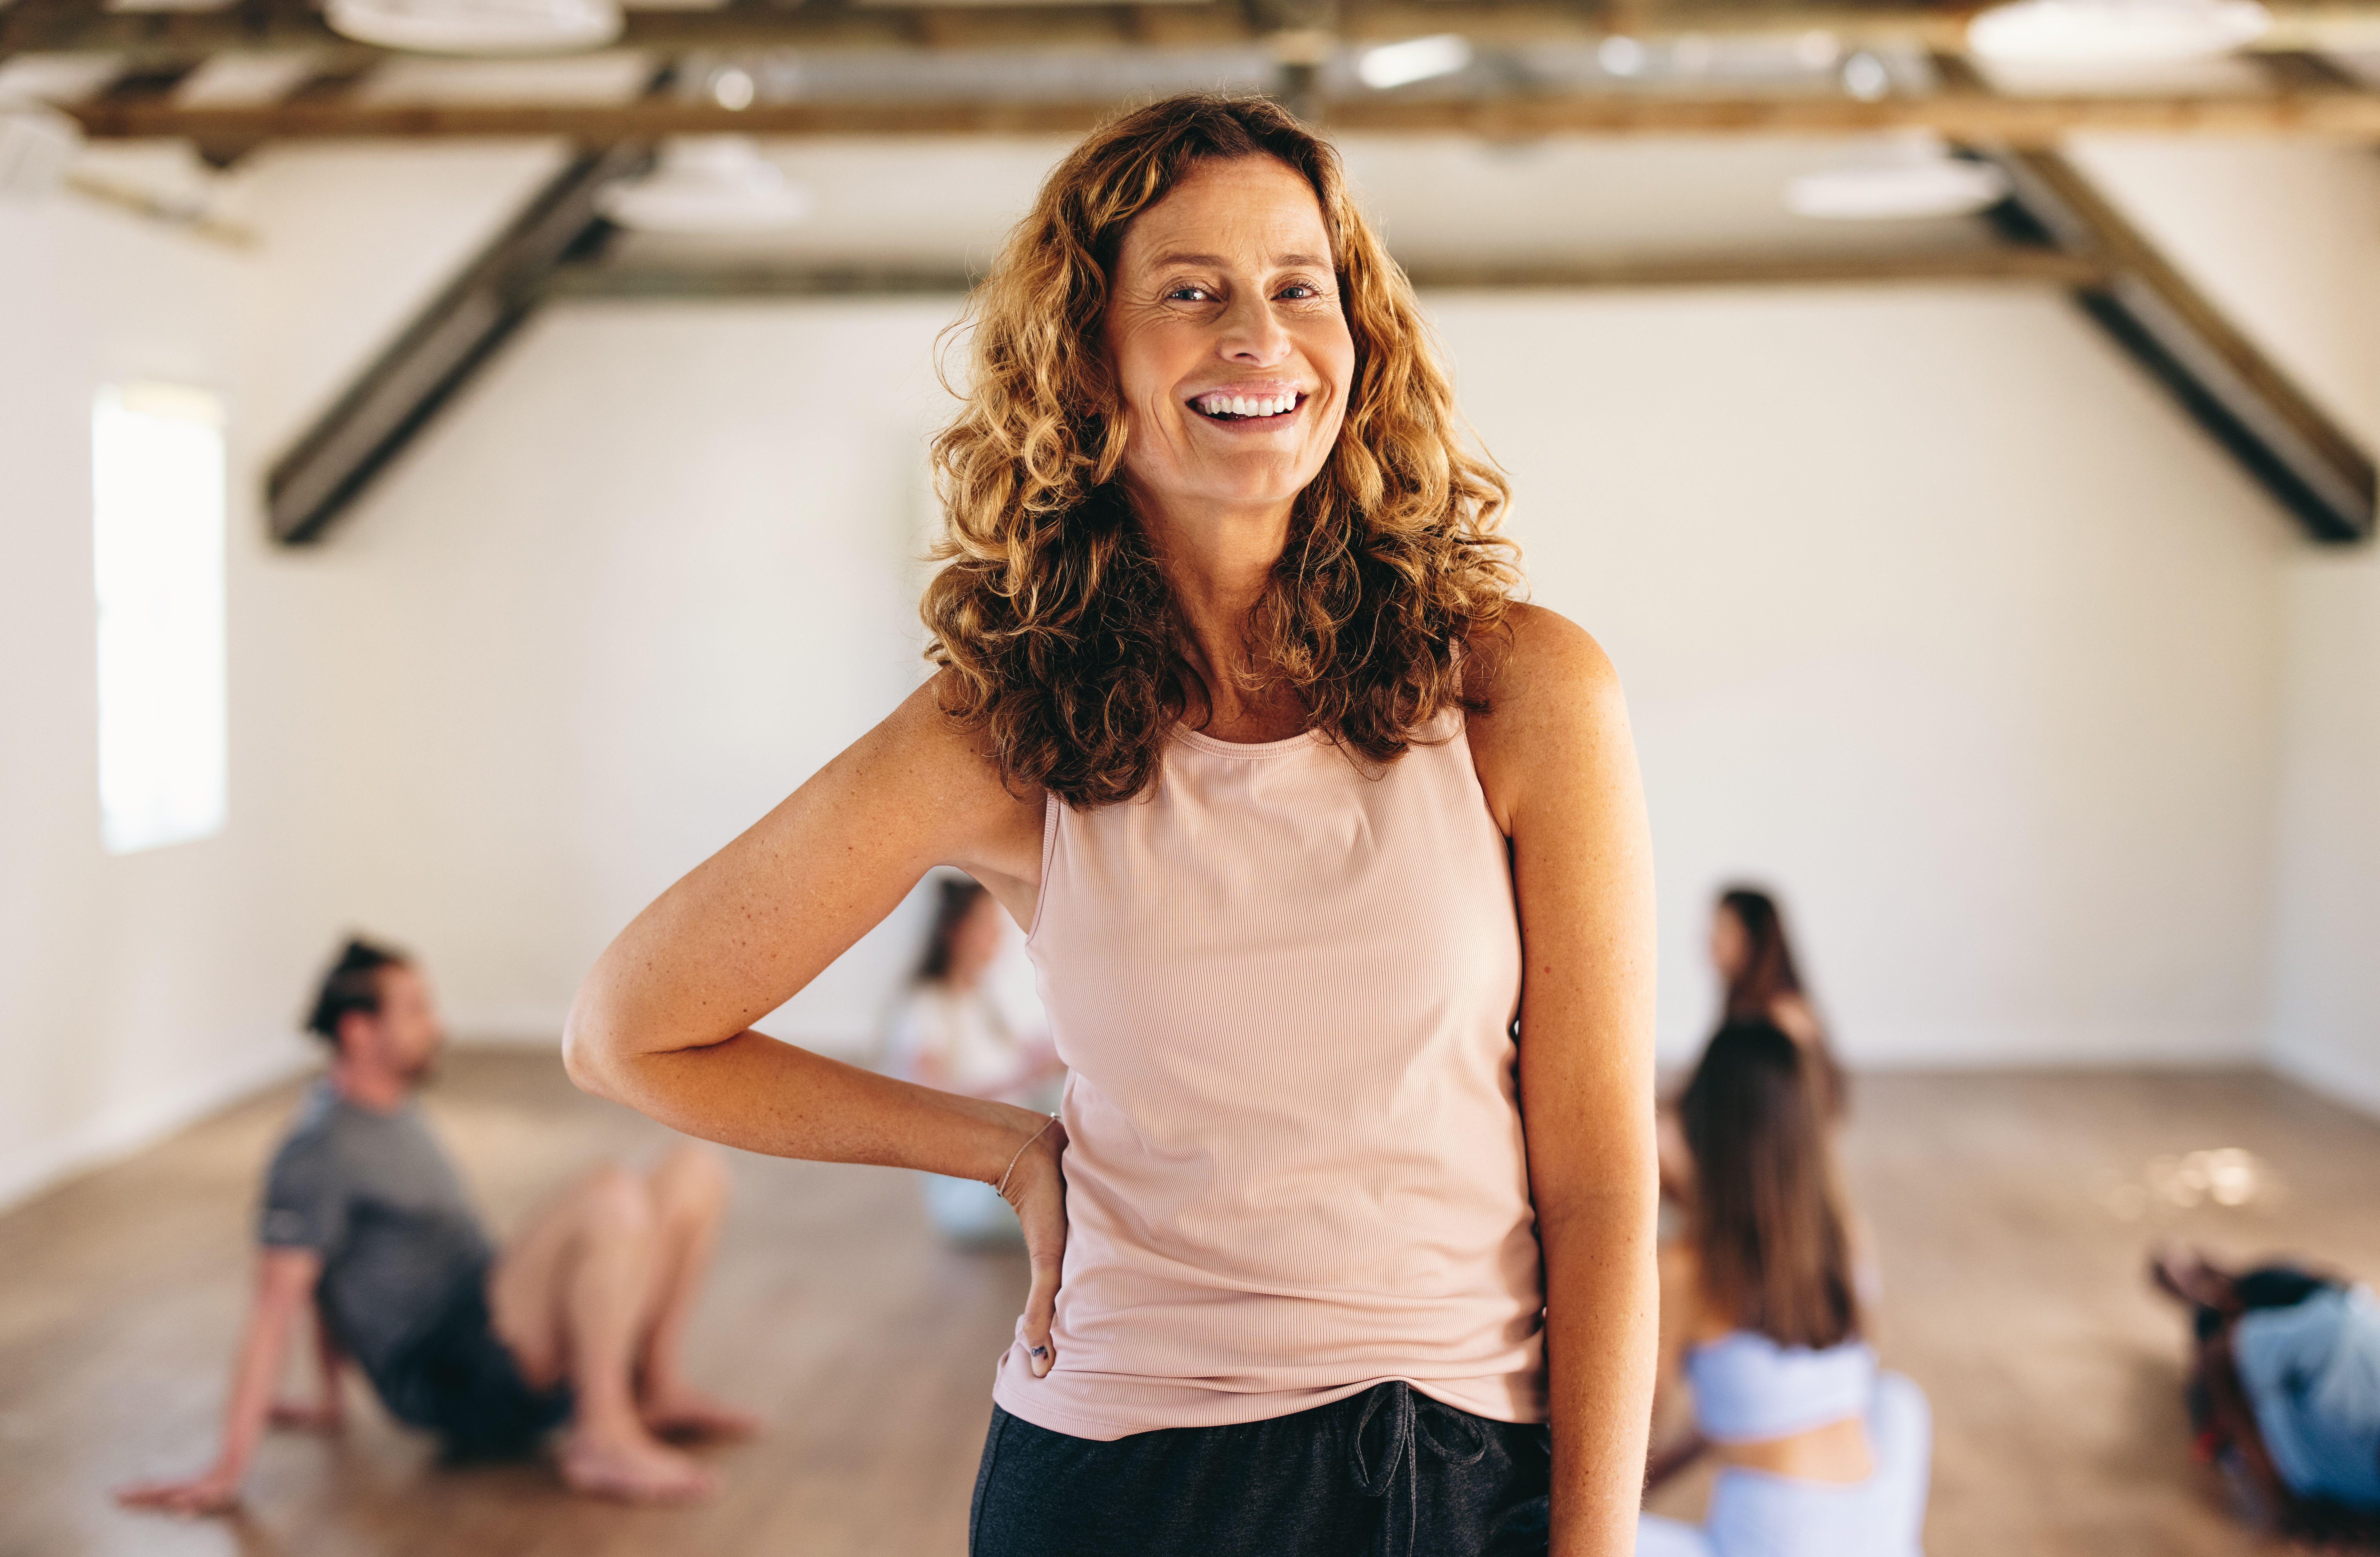 Middle aged white woman at a yoga class, standing up and smiling at the camera